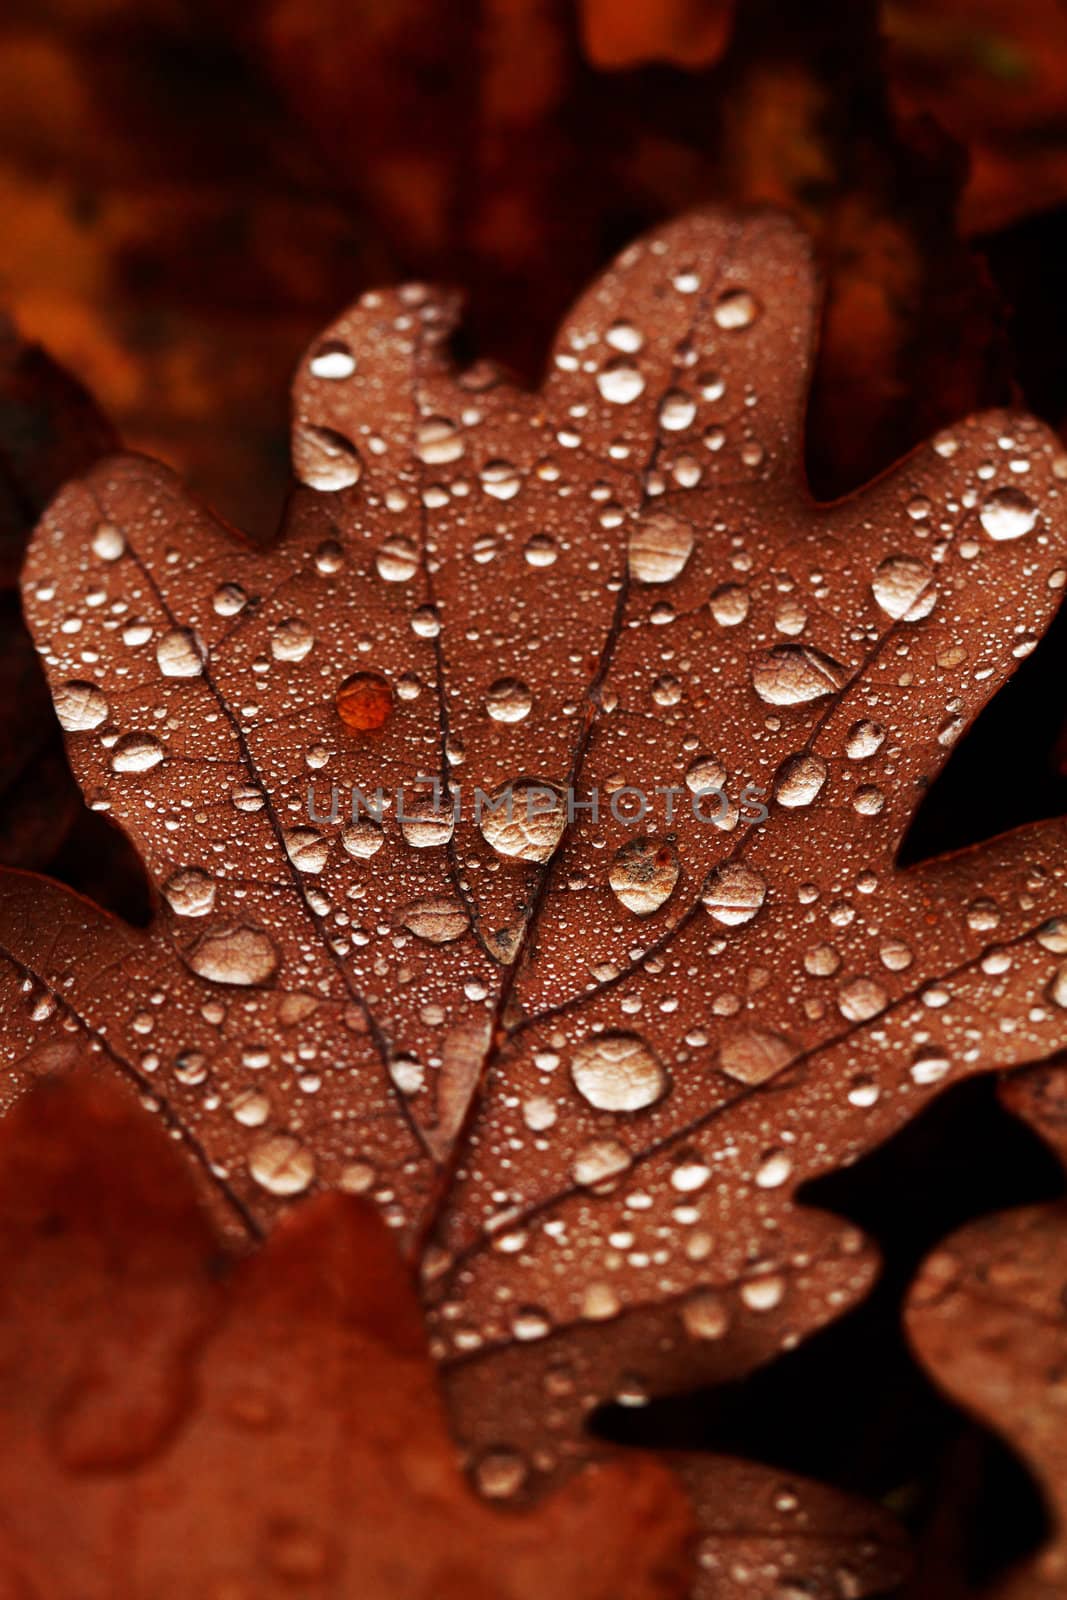 Fallen leaves covered with raindrops by Nneirda